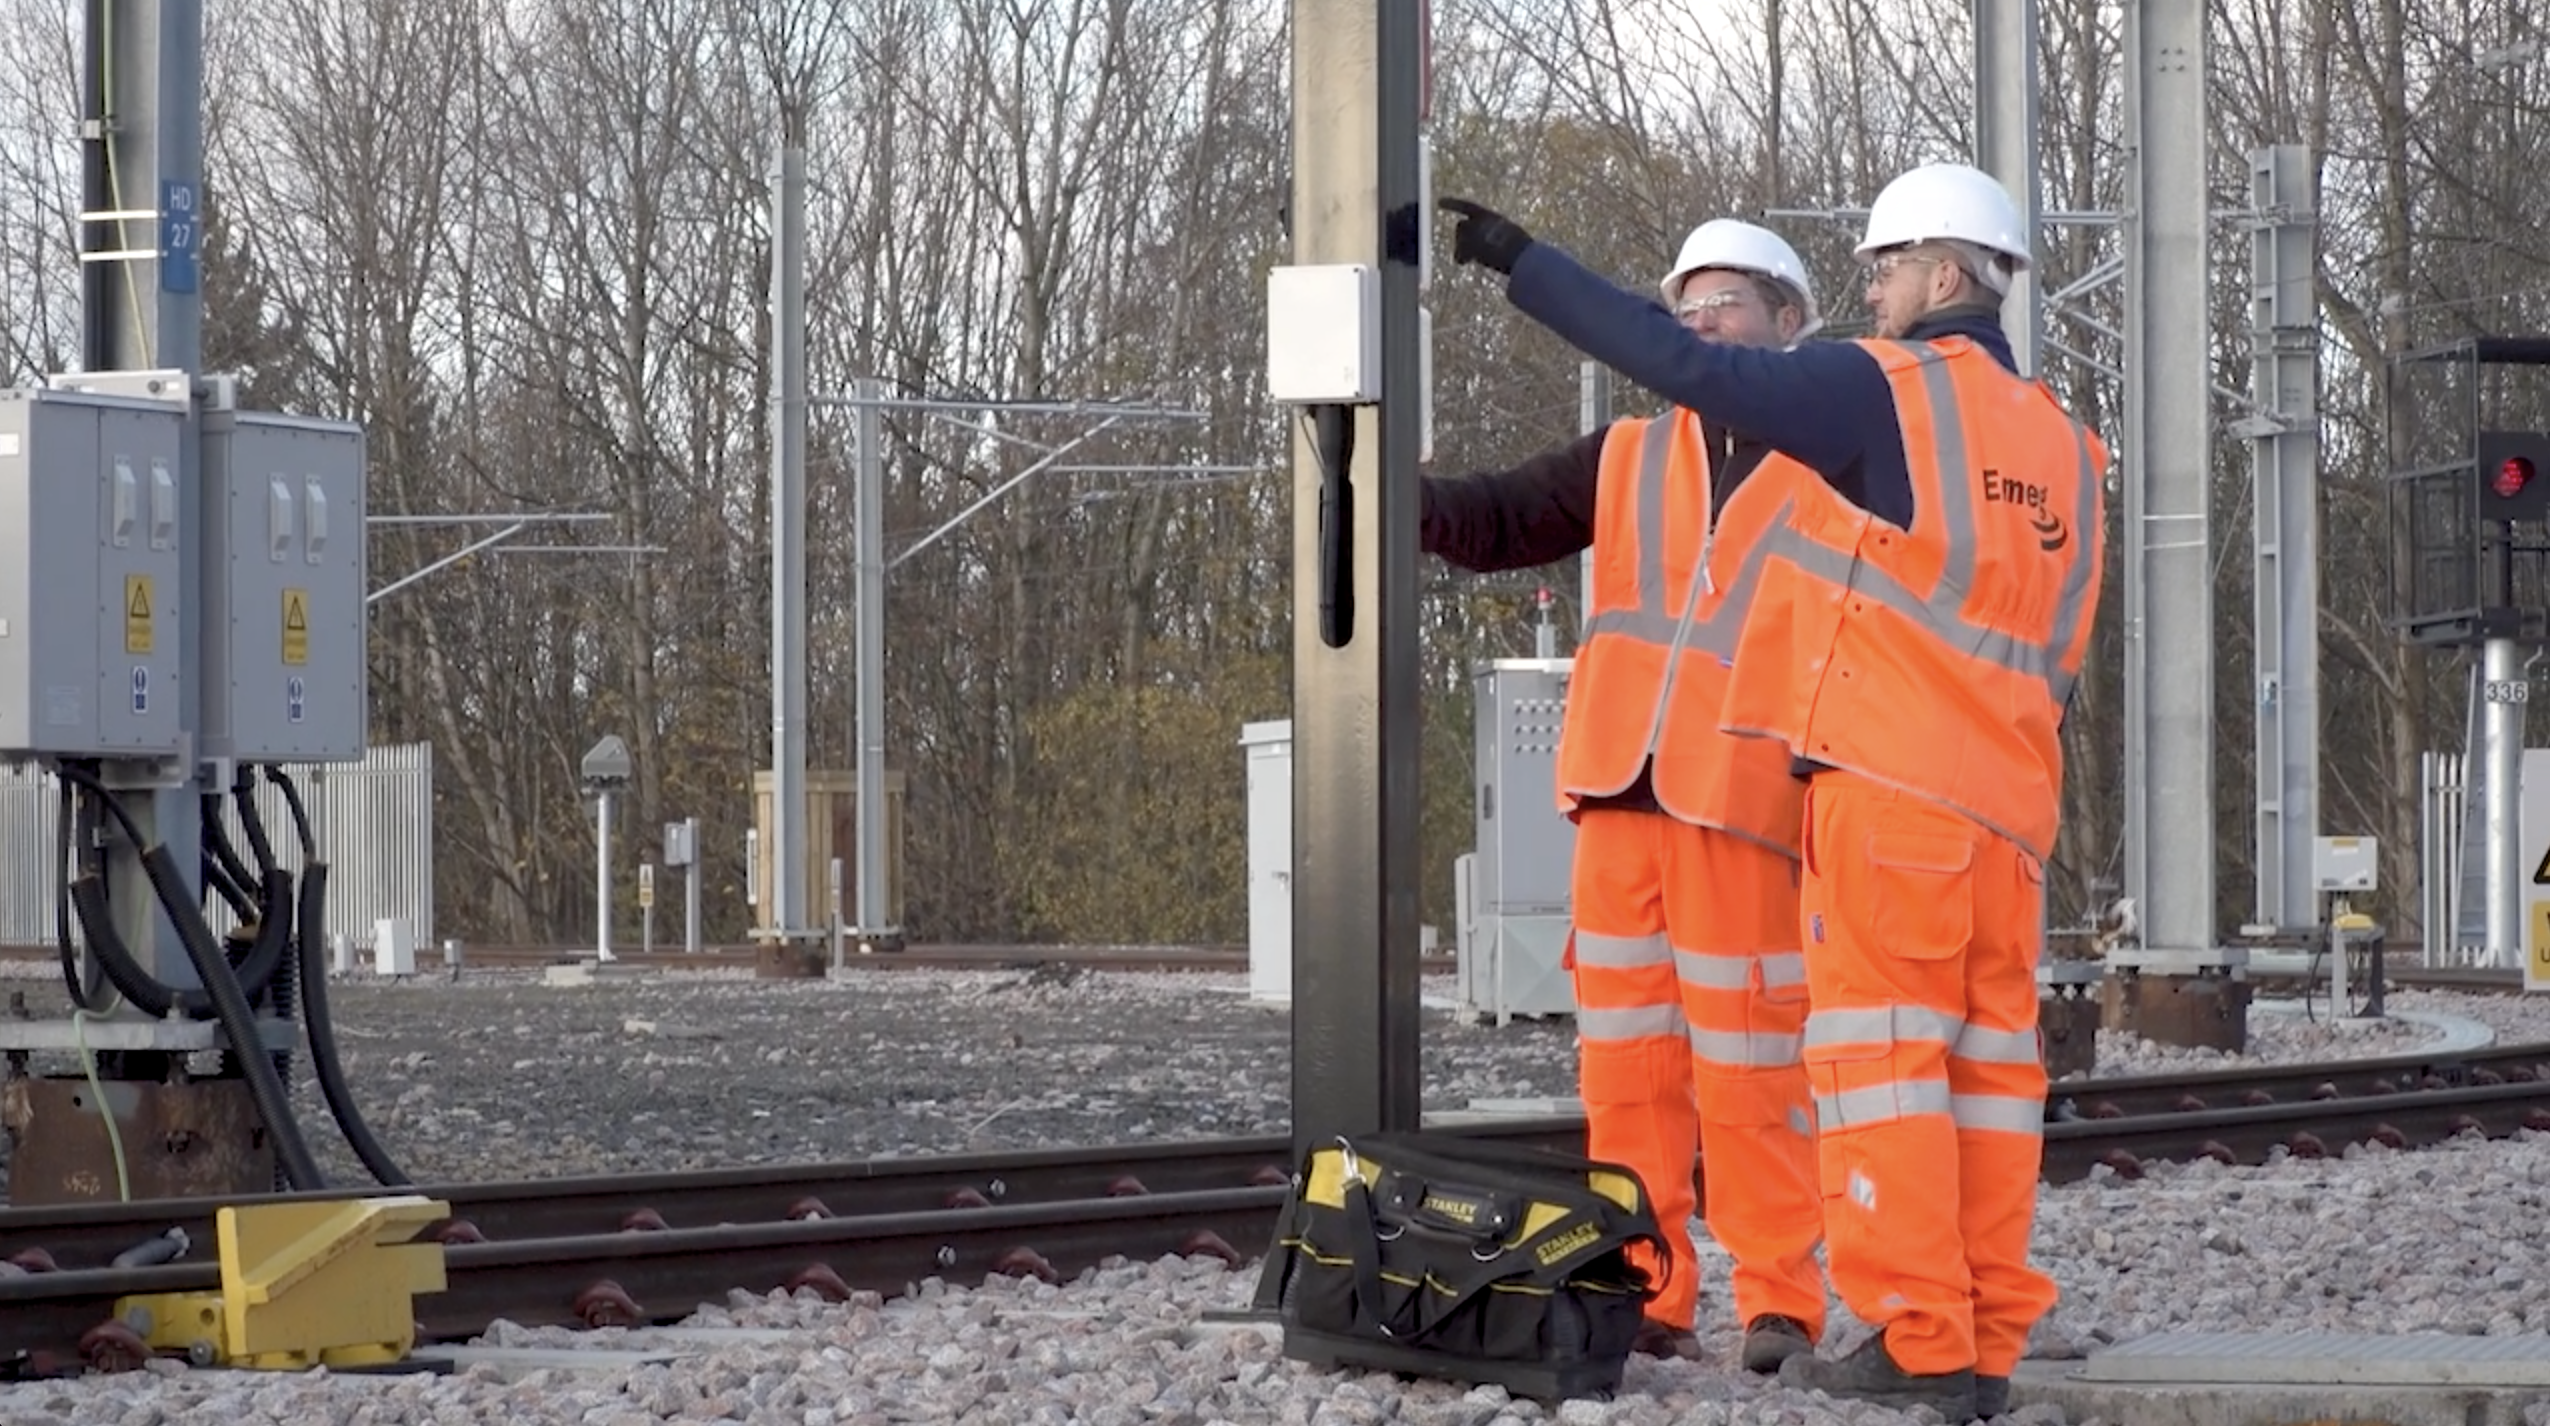 Emeg engineers on site at a rail depot